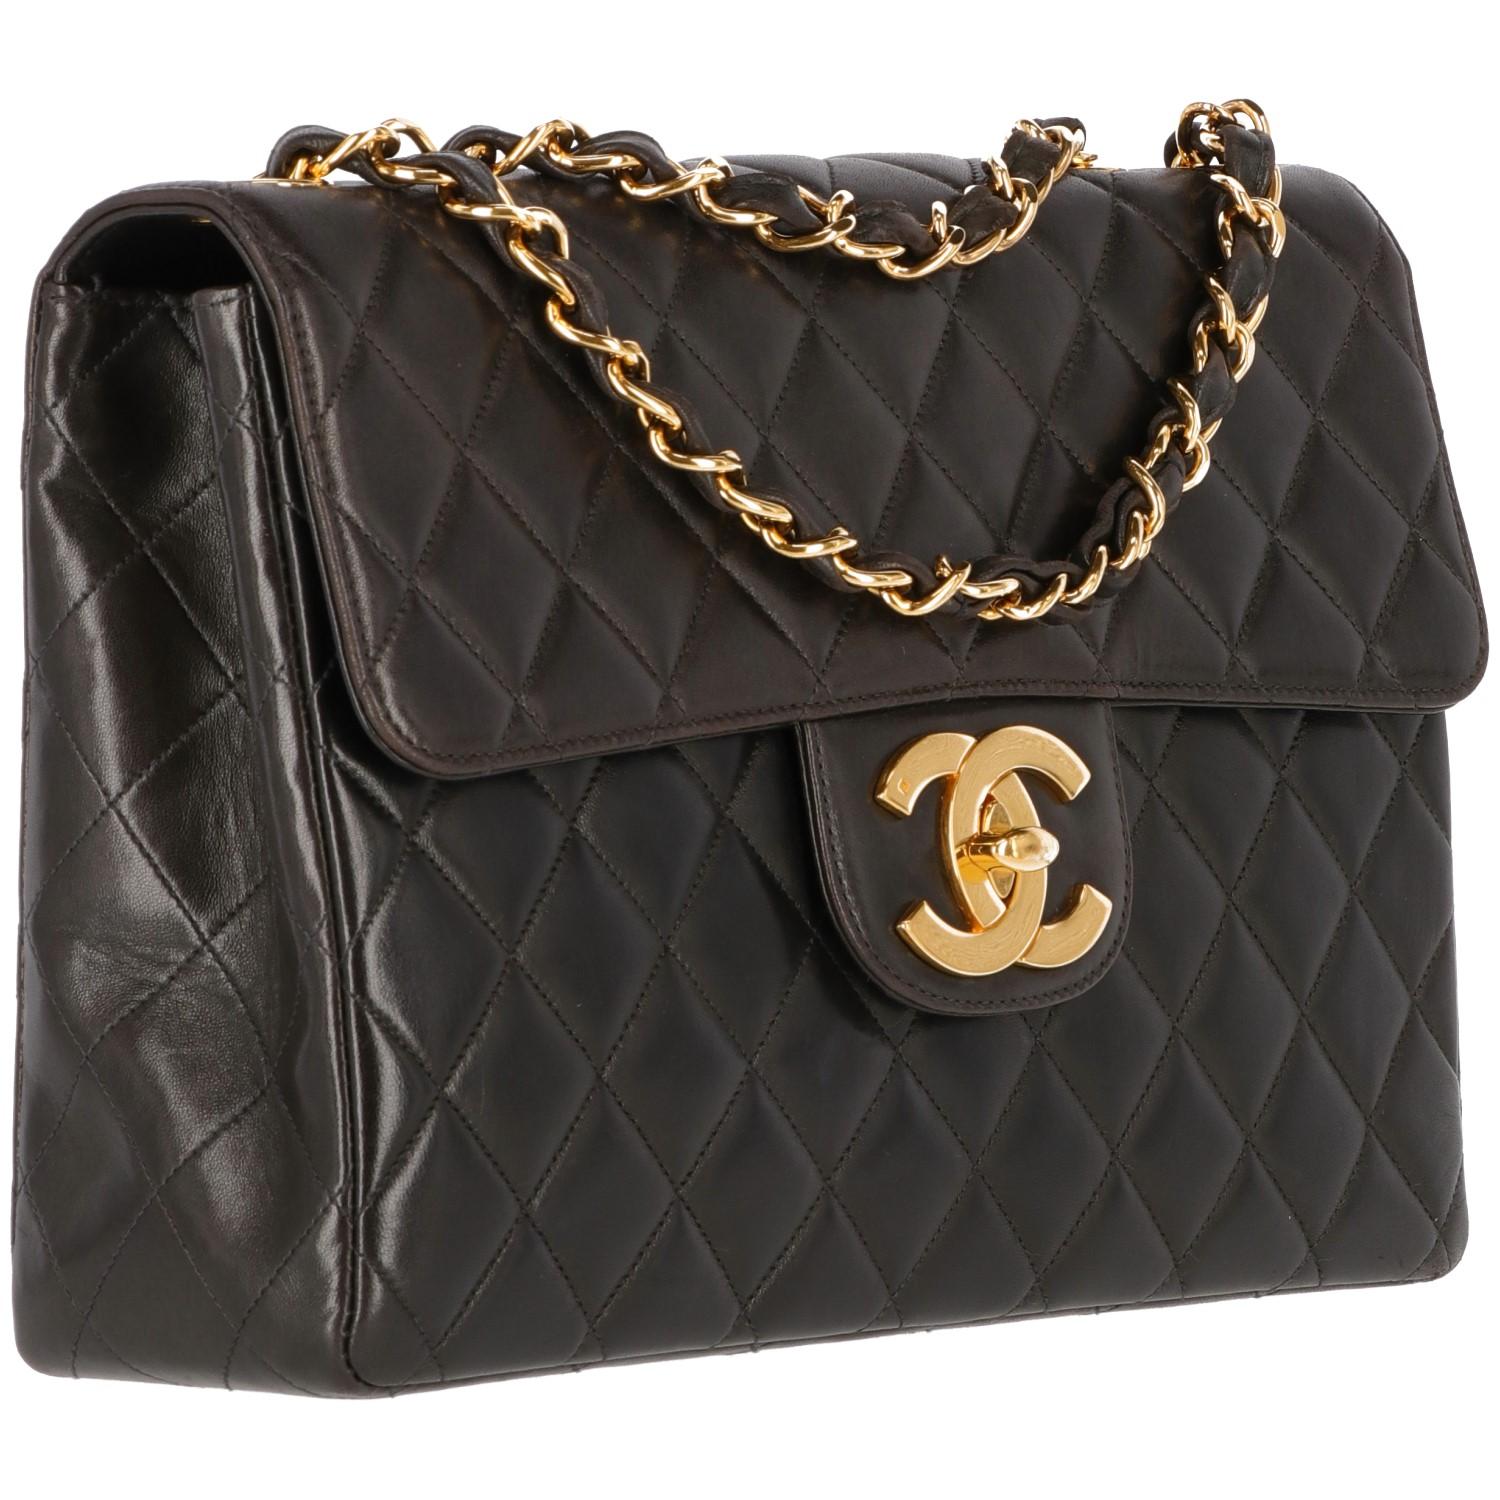 Chanel Jumbo brown bag with diamond matelassé lamb leather and gold tone chain.  Made in France


Cod. 5260352

Anni: 1997/1999

Width: 30 cm
Height: 20 cm
Depth: 8 cm

